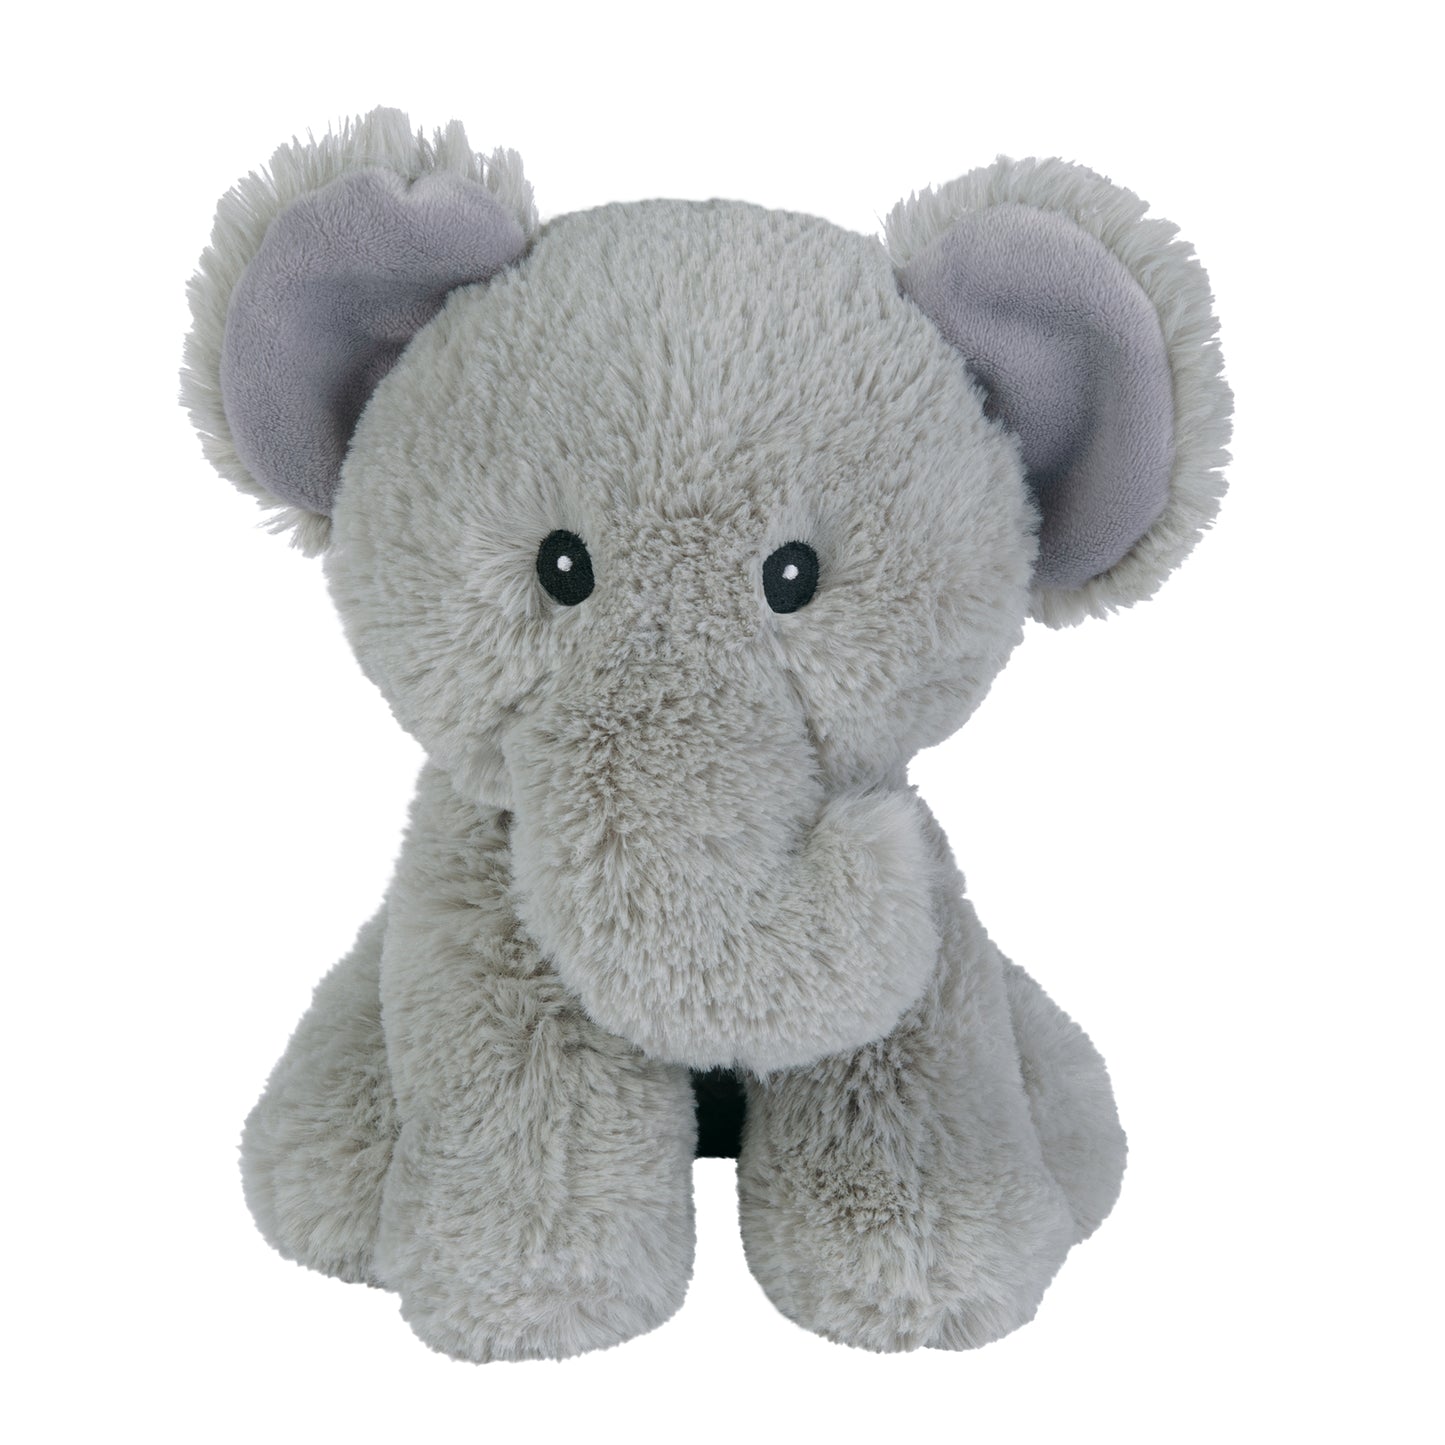 Elephant plush toy is made of soft glacier gray plush and measures 9 inches tall.